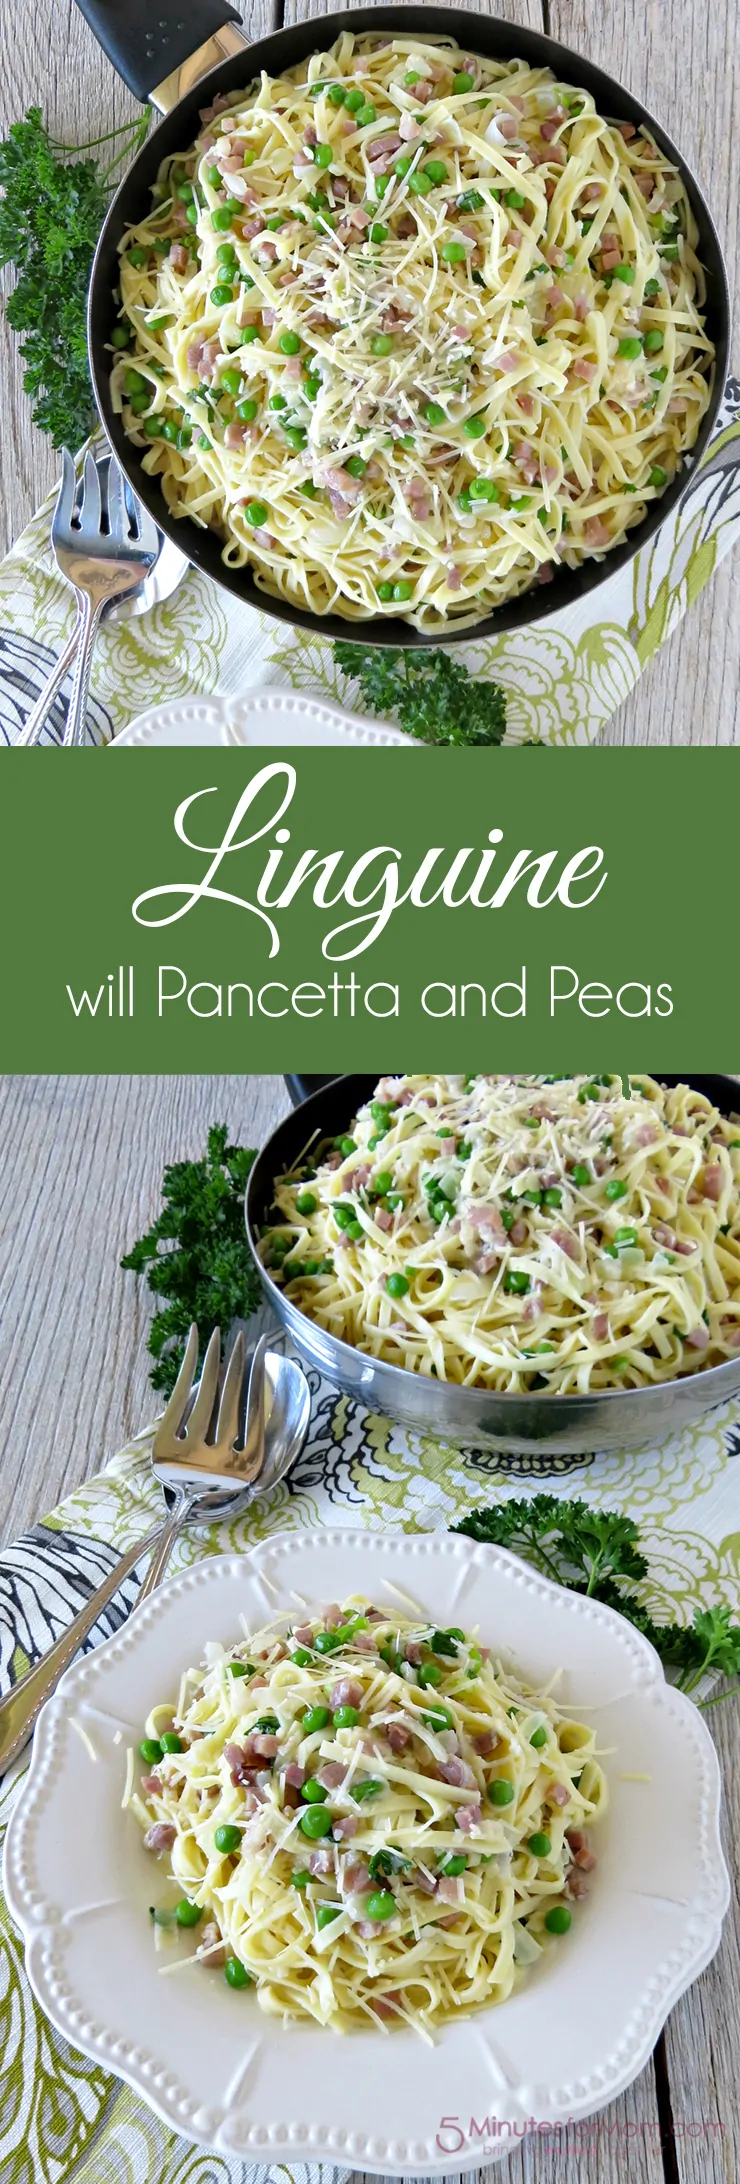 This Linguine with Pancetta and Peas is perfect for spring! It's fresh, savory, and satisfying all at the same time!